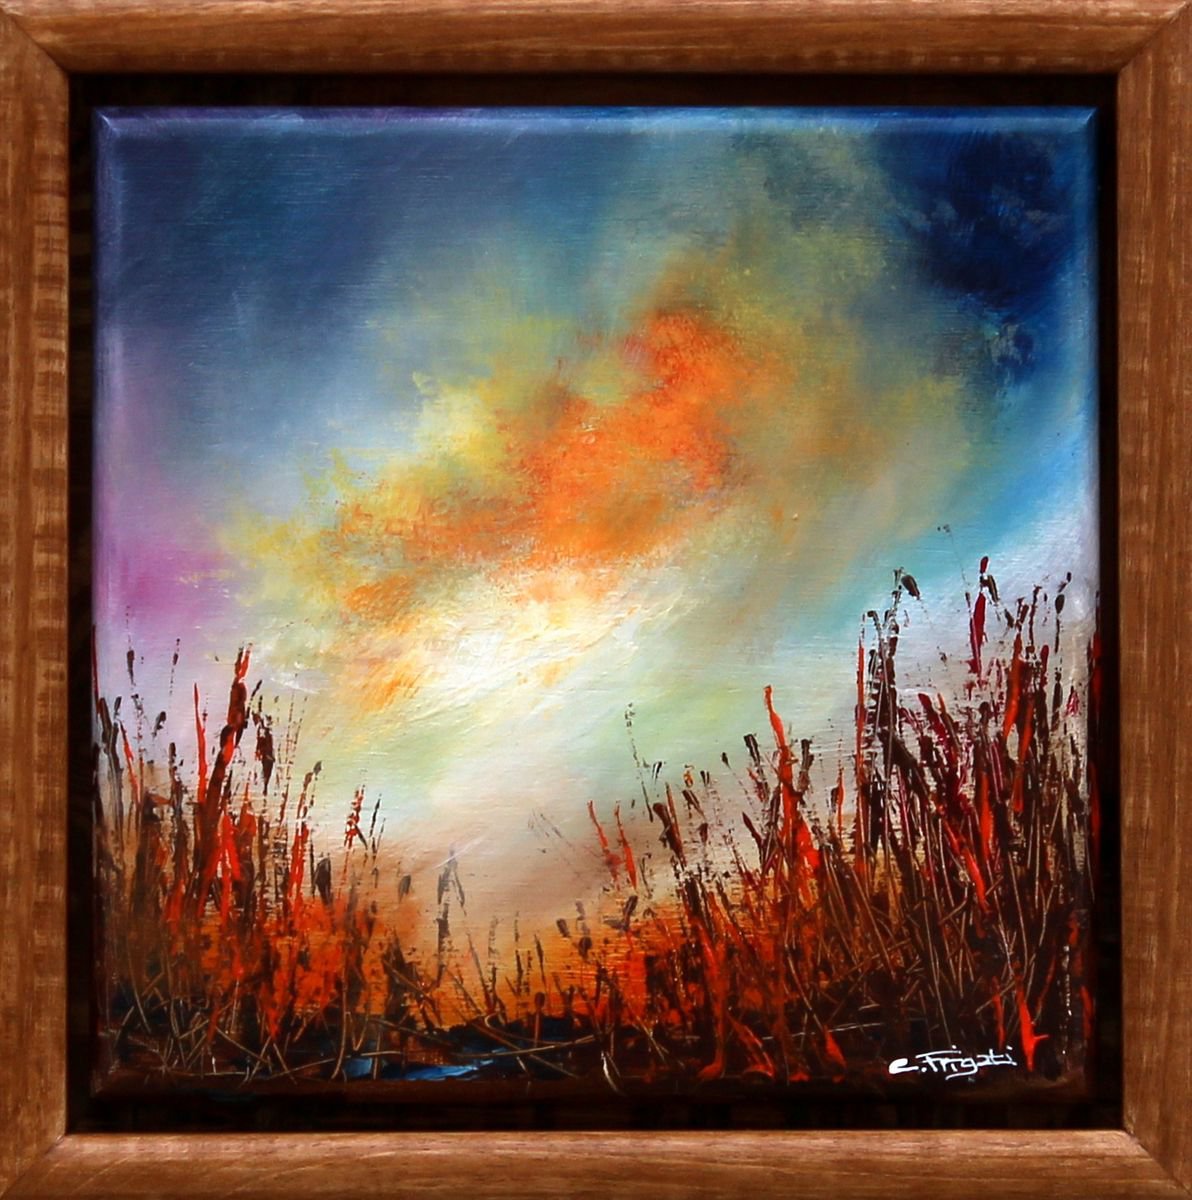 Firefly- Framed original abstract painting by Cecilia Frigati